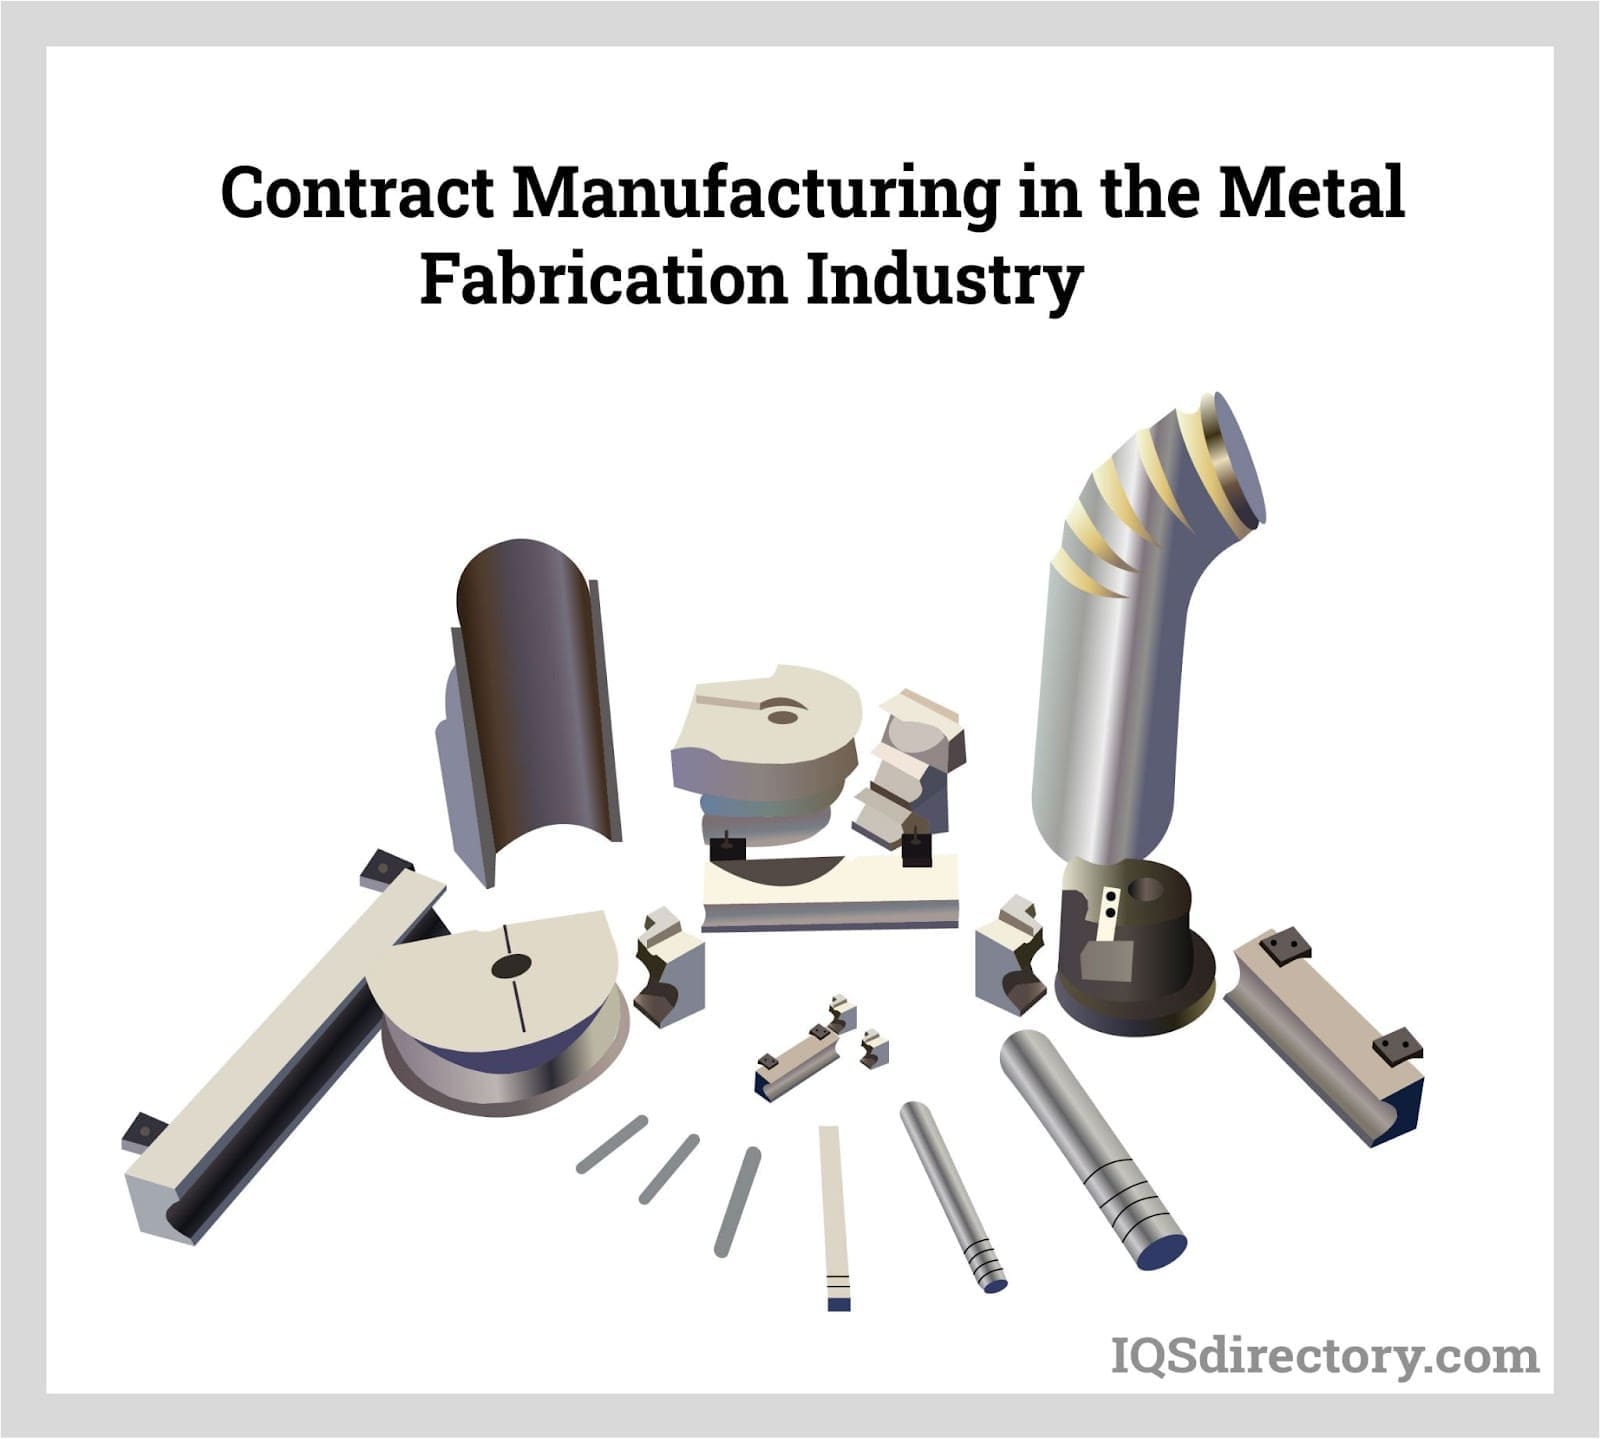 Contract Manufacturing in the Metal Fabrication Industry